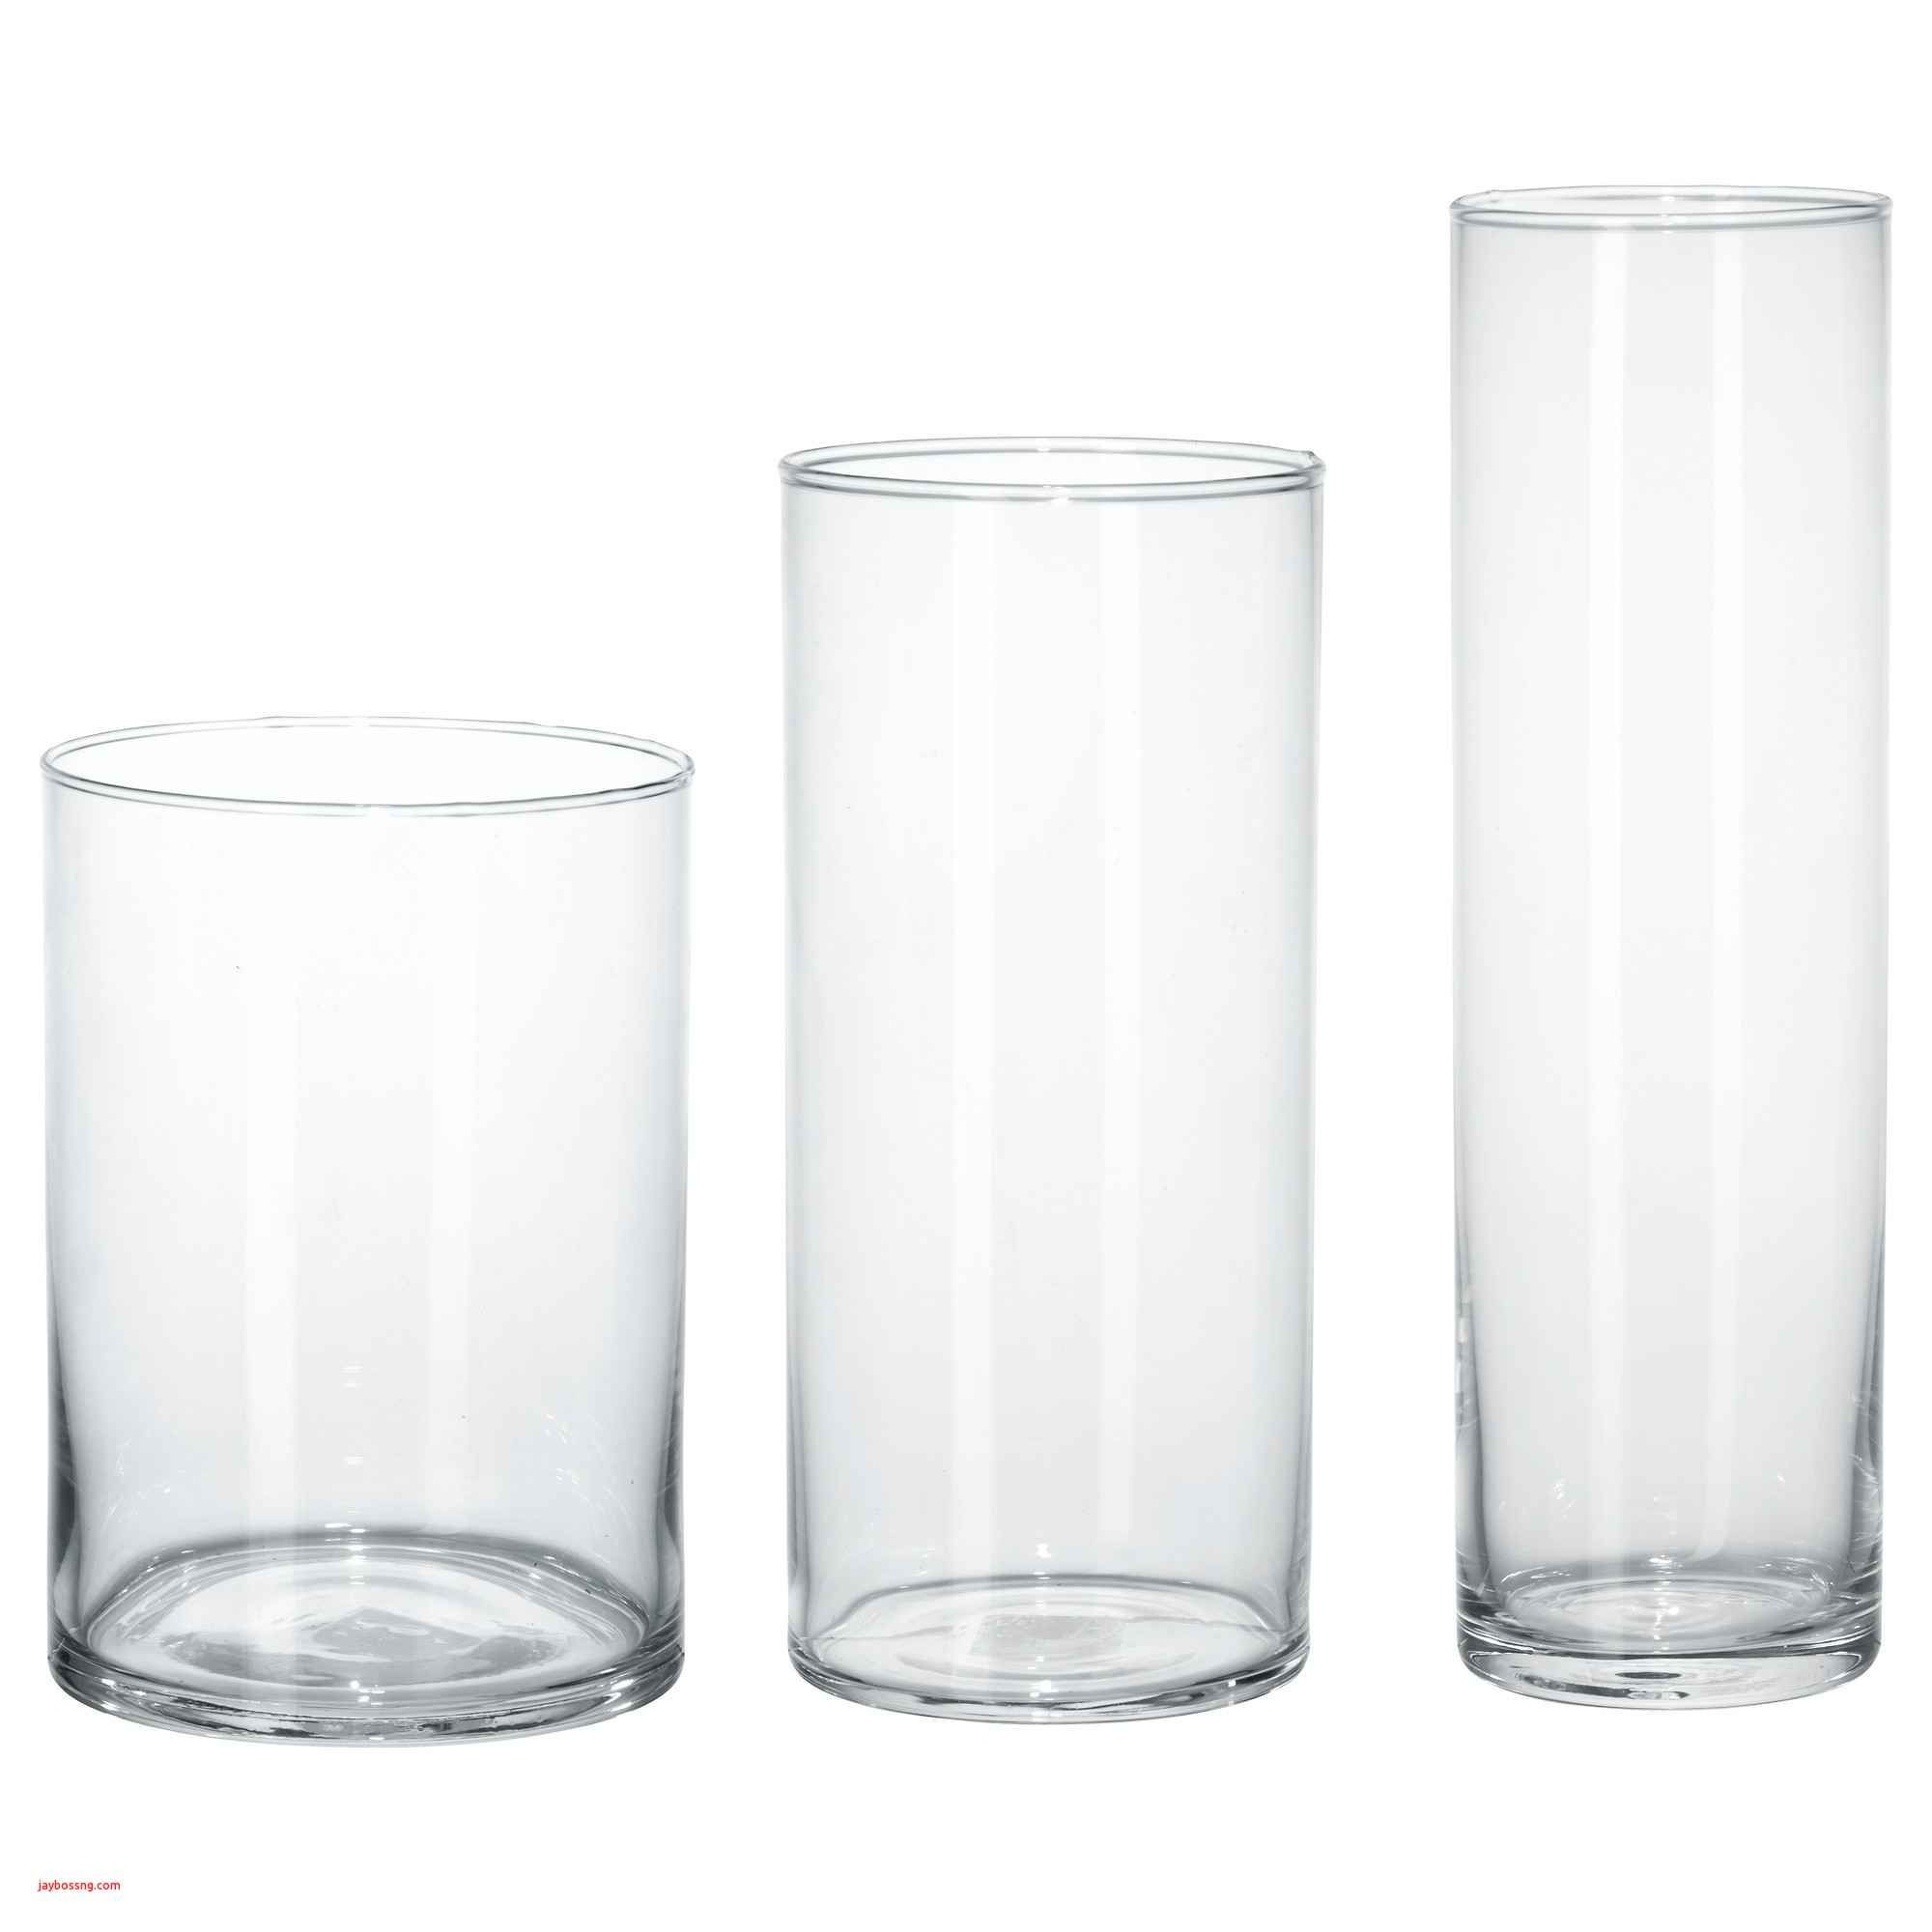 10 Unique Glass Cylinder Vases 2024 free download glass cylinder vases of brown glass vase fresh ikea white table created pe s5h vases ikea with brown glass vase fresh ikea white table created pe s5h vases ikea vase i 0d bladet